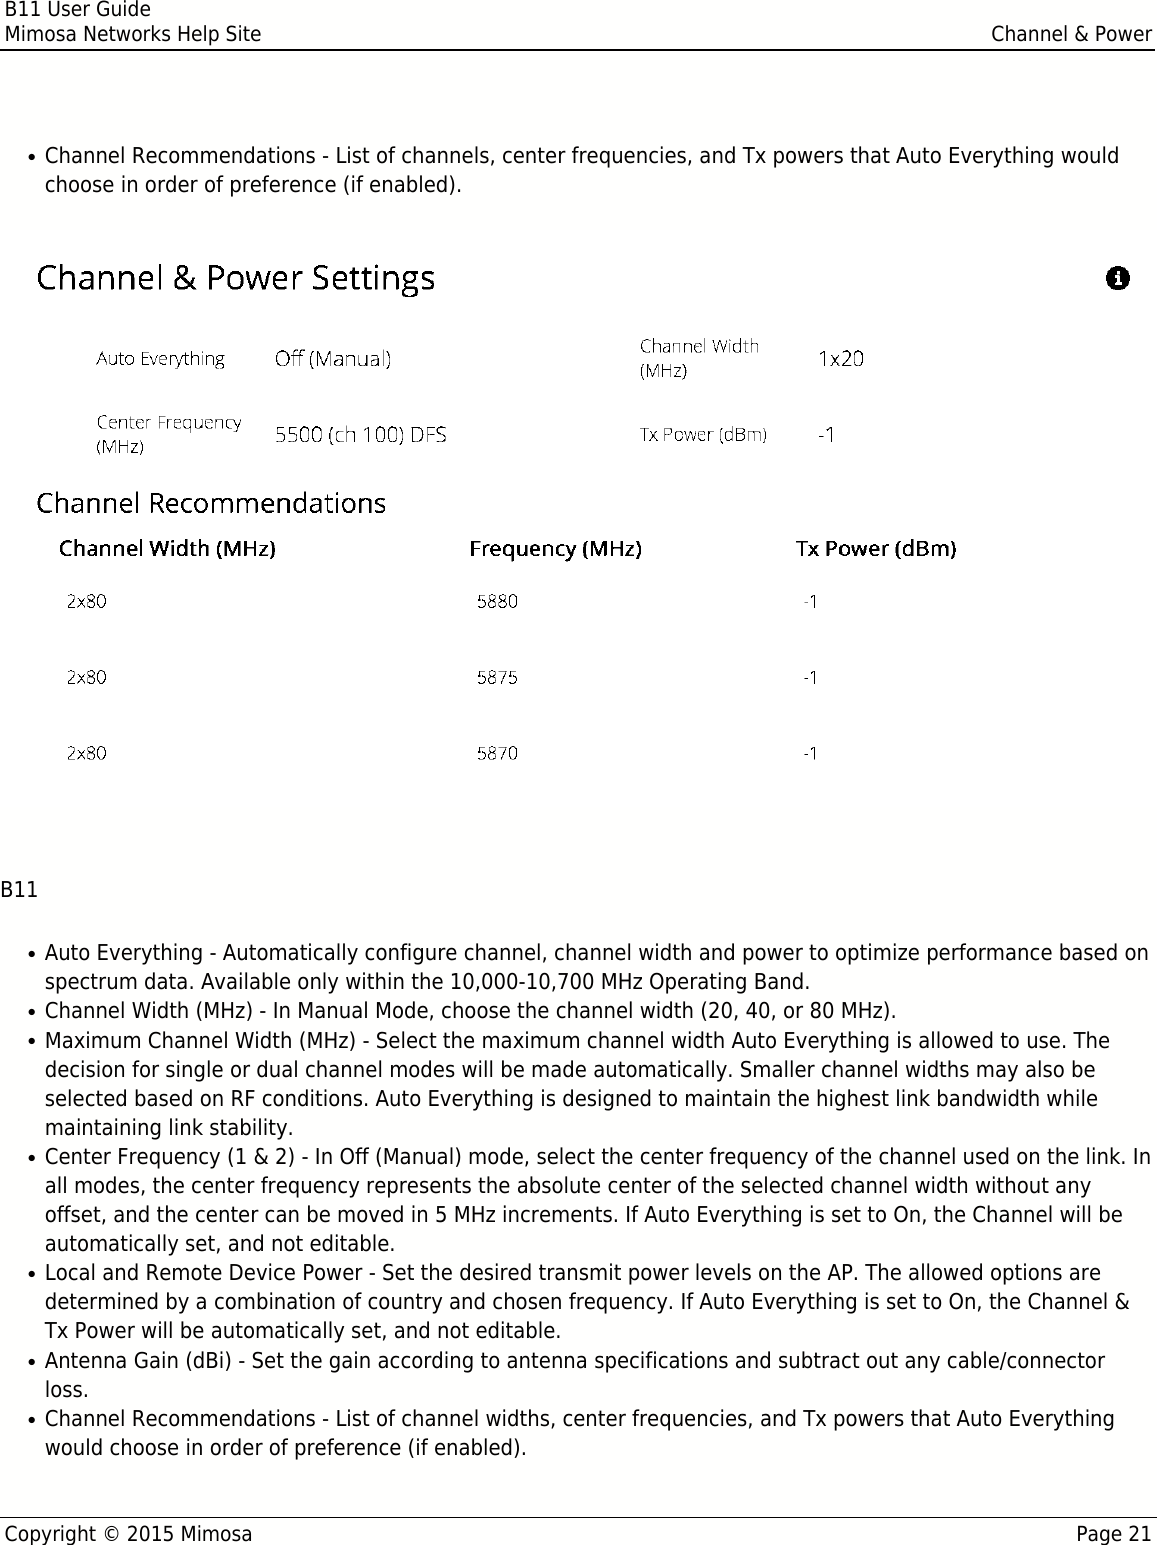 B11 User GuideMimosa Networks Help Site Channel &amp; PowerCopyright © 2015 Mimosa Page 21Channel Recommendations - List of channels, center frequencies, and Tx powers that Auto Everything would●choose in order of preference (if enabled). B11Auto Everything - Automatically configure channel, channel width and power to optimize performance based on●spectrum data. Available only within the 10,000-10,700 MHz Operating Band.Channel Width (MHz) - In Manual Mode, choose the channel width (20, 40, or 80 MHz). ●Maximum Channel Width (MHz) - Select the maximum channel width Auto Everything is allowed to use. The●decision for single or dual channel modes will be made automatically. Smaller channel widths may also beselected based on RF conditions. Auto Everything is designed to maintain the highest link bandwidth whilemaintaining link stability.Center Frequency (1 &amp; 2) - In Off (Manual) mode, select the center frequency of the channel used on the link. In●all modes, the center frequency represents the absolute center of the selected channel width without anyoffset, and the center can be moved in 5 MHz increments. If Auto Everything is set to On, the Channel will beautomatically set, and not editable.Local and Remote Device Power - Set the desired transmit power levels on the AP. The allowed options are●determined by a combination of country and chosen frequency. If Auto Everything is set to On, the Channel &amp;Tx Power will be automatically set, and not editable. Antenna Gain (dBi) - Set the gain according to antenna specifications and subtract out any cable/connector●loss. Channel Recommendations - List of channel widths, center frequencies, and Tx powers that Auto Everything●would choose in order of preference (if enabled).